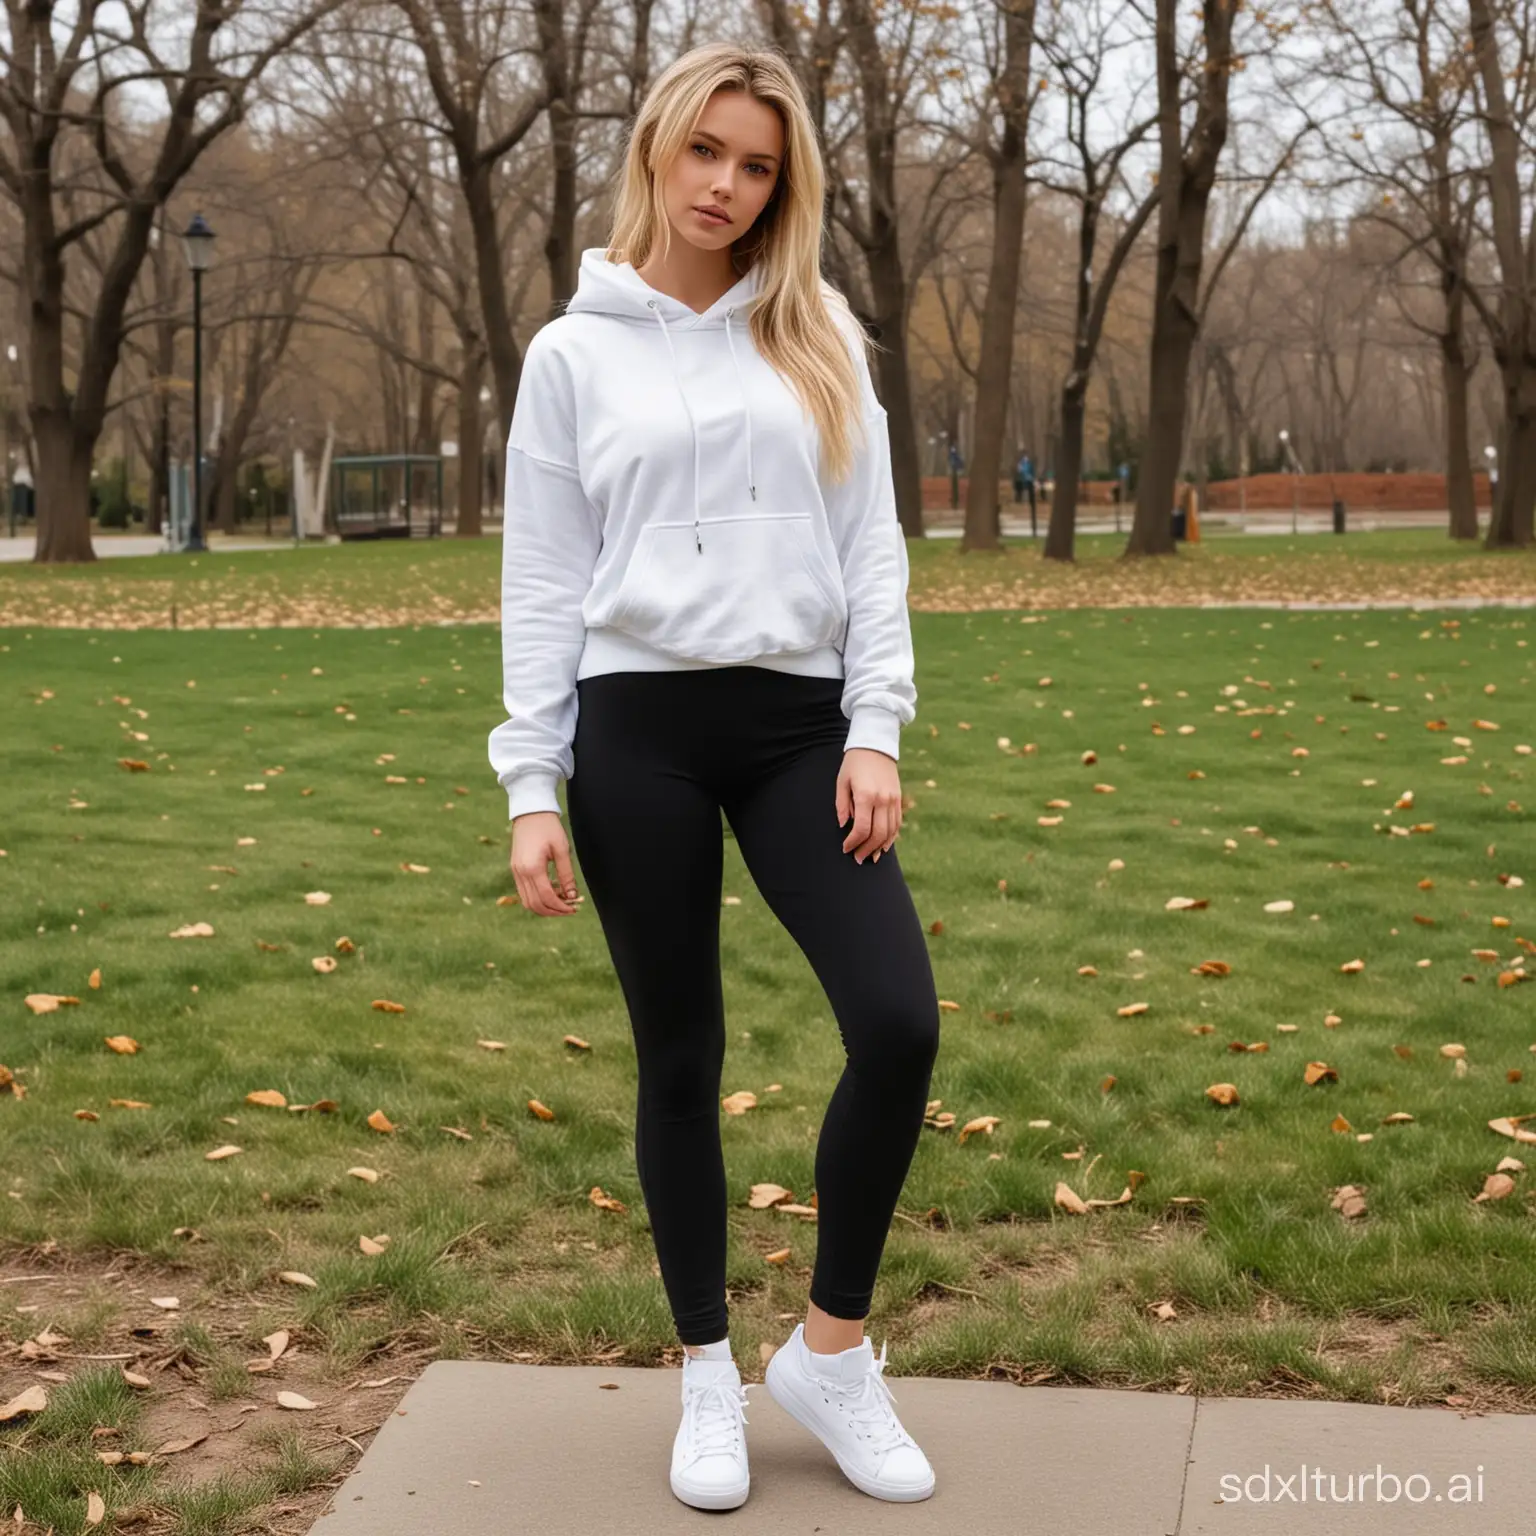 Athletic-Blonde-Girl-Strikes-Epic-Pose-in-White-Hoodie-Outdoors